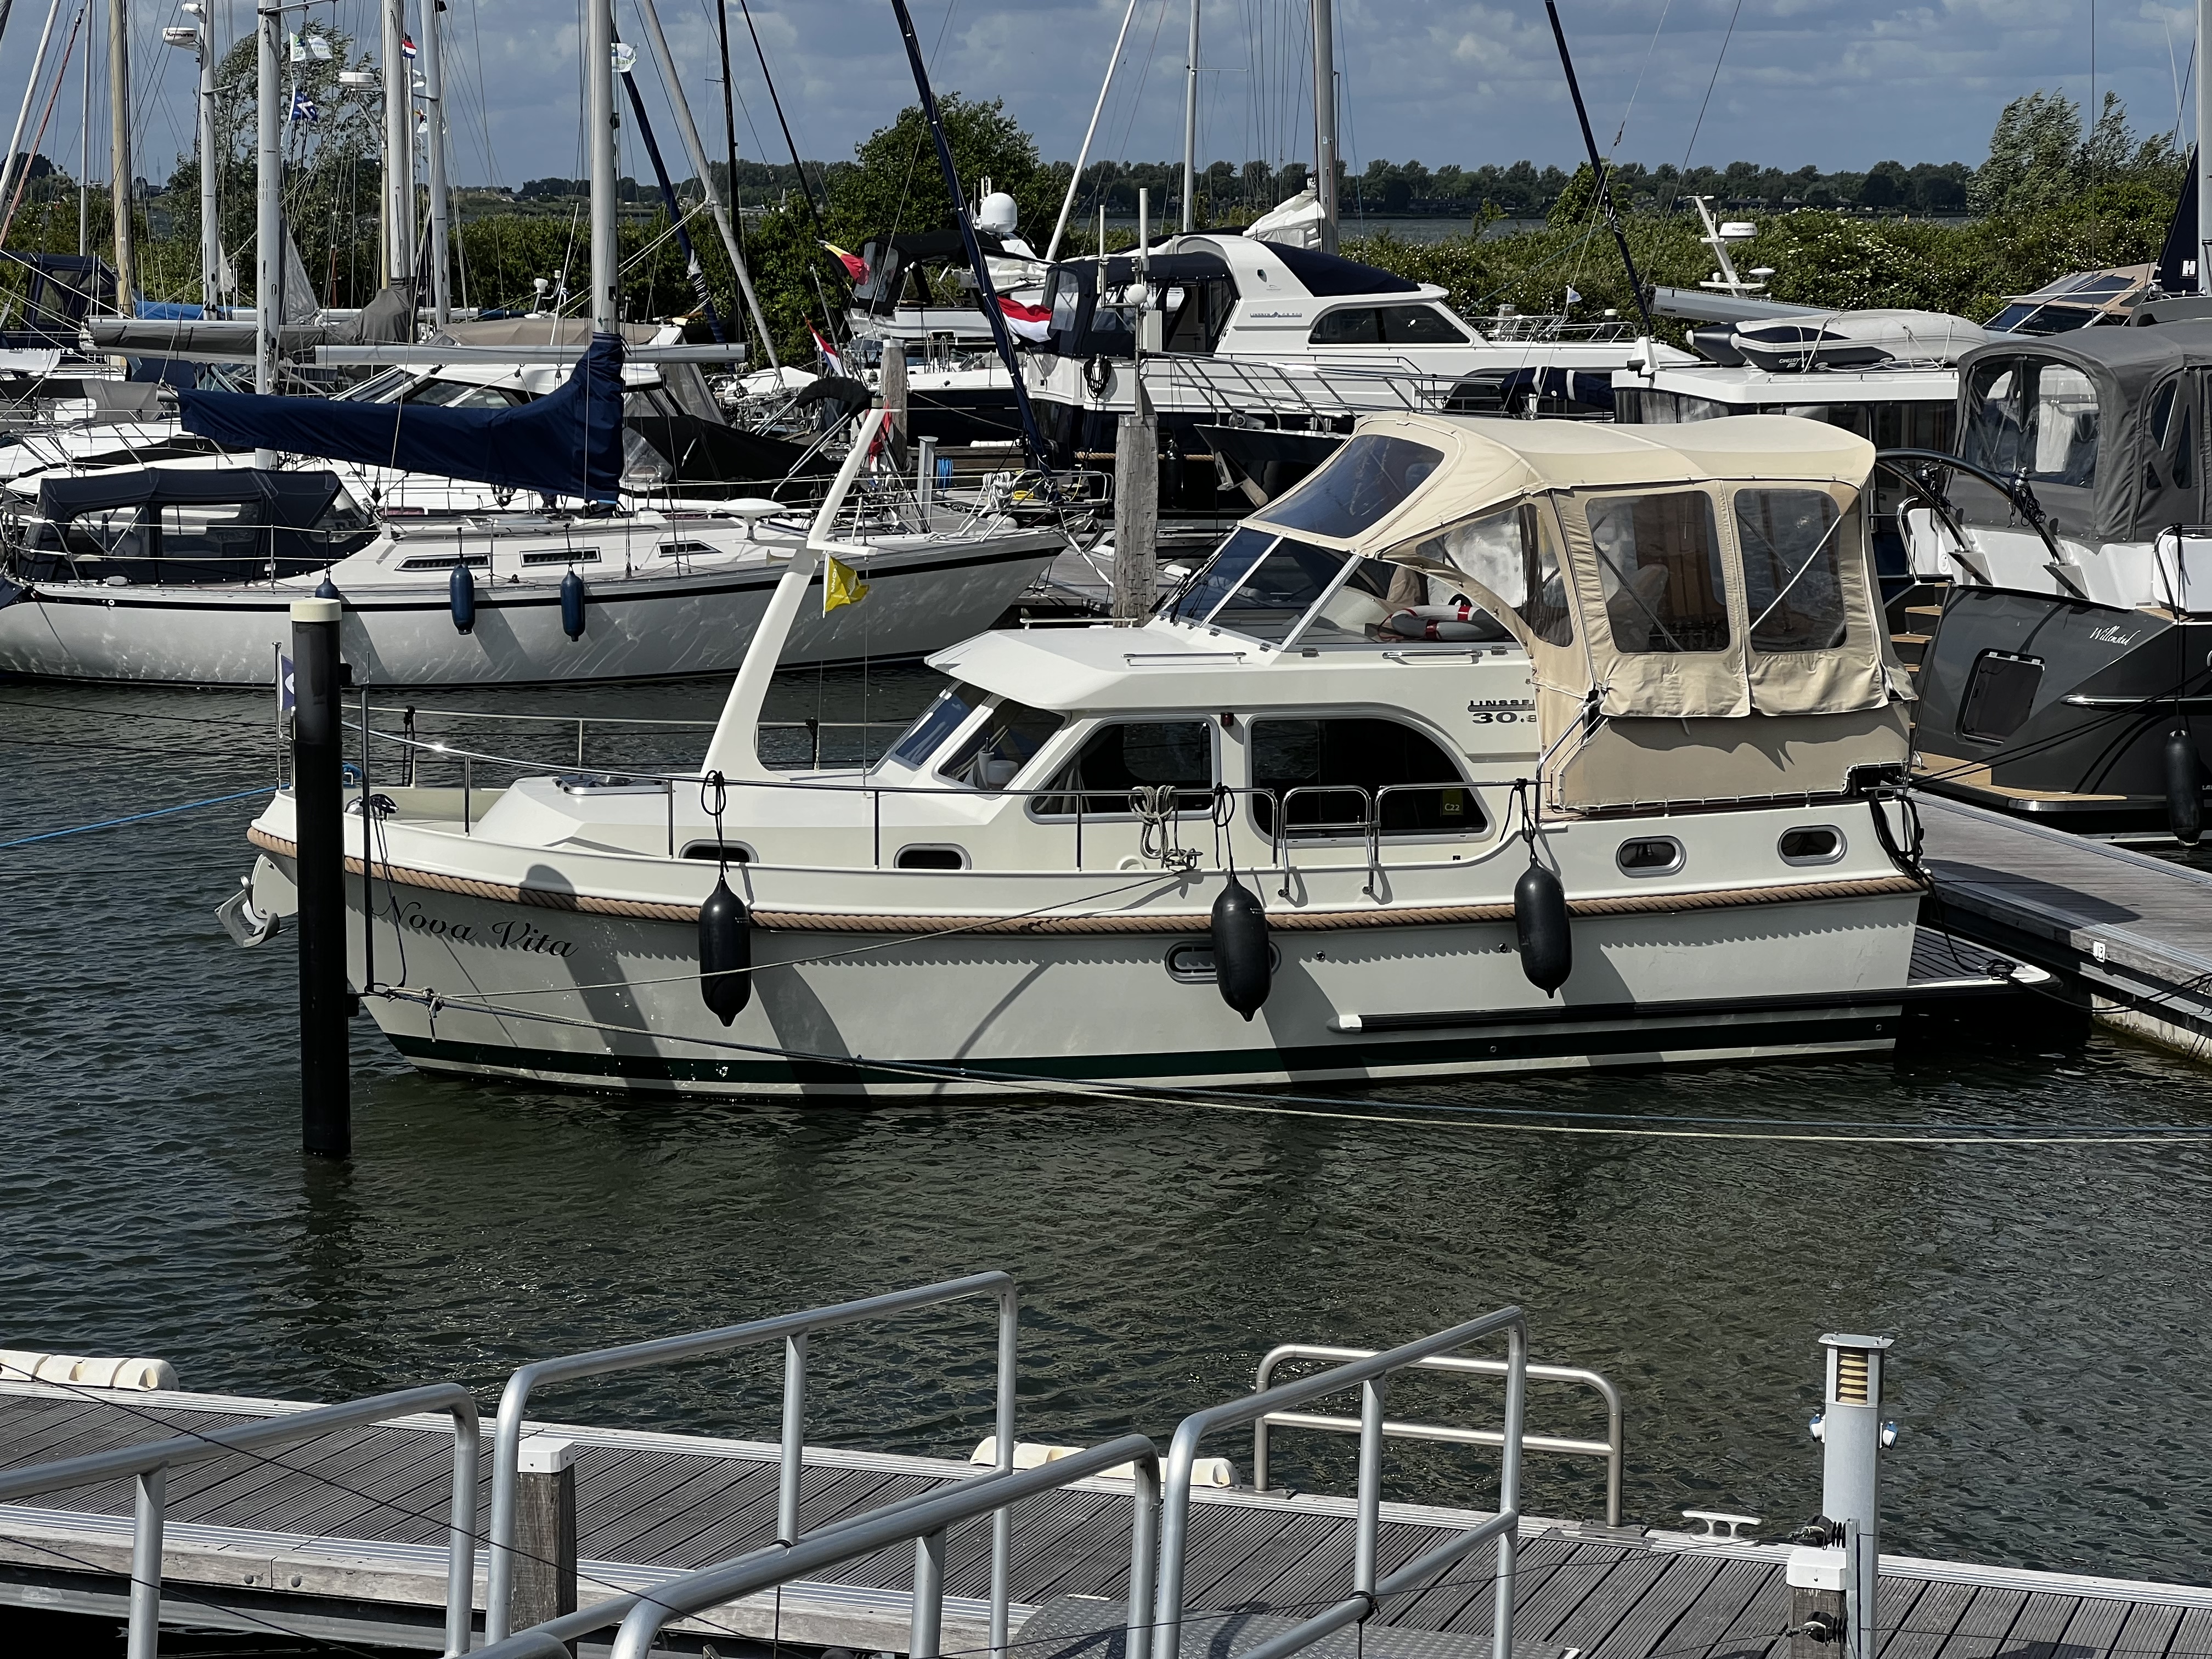 Linssen Grand Sturdy 30.9 AC - Motor Boat Charter Germany & Boat hire in Germany Werder (Havel) Marina Vulkan Werft 1